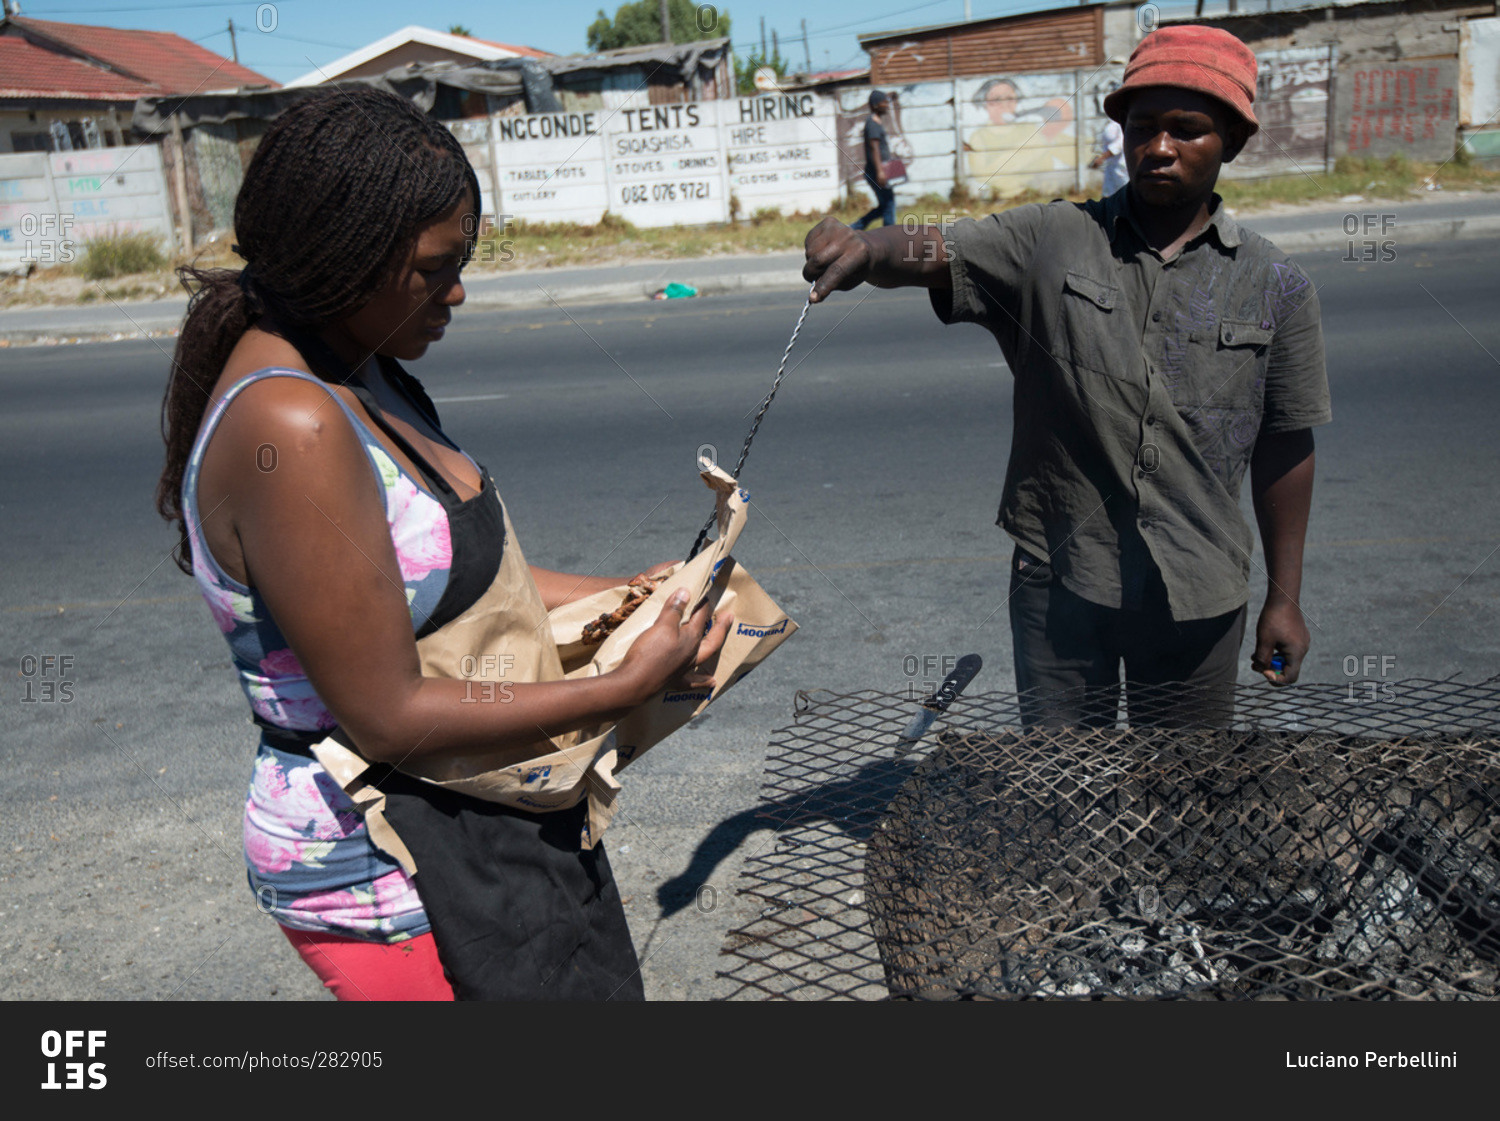 Cape Town, South Africa - February 17, 2015: Man and woman making street food, Cape Town, South Africa